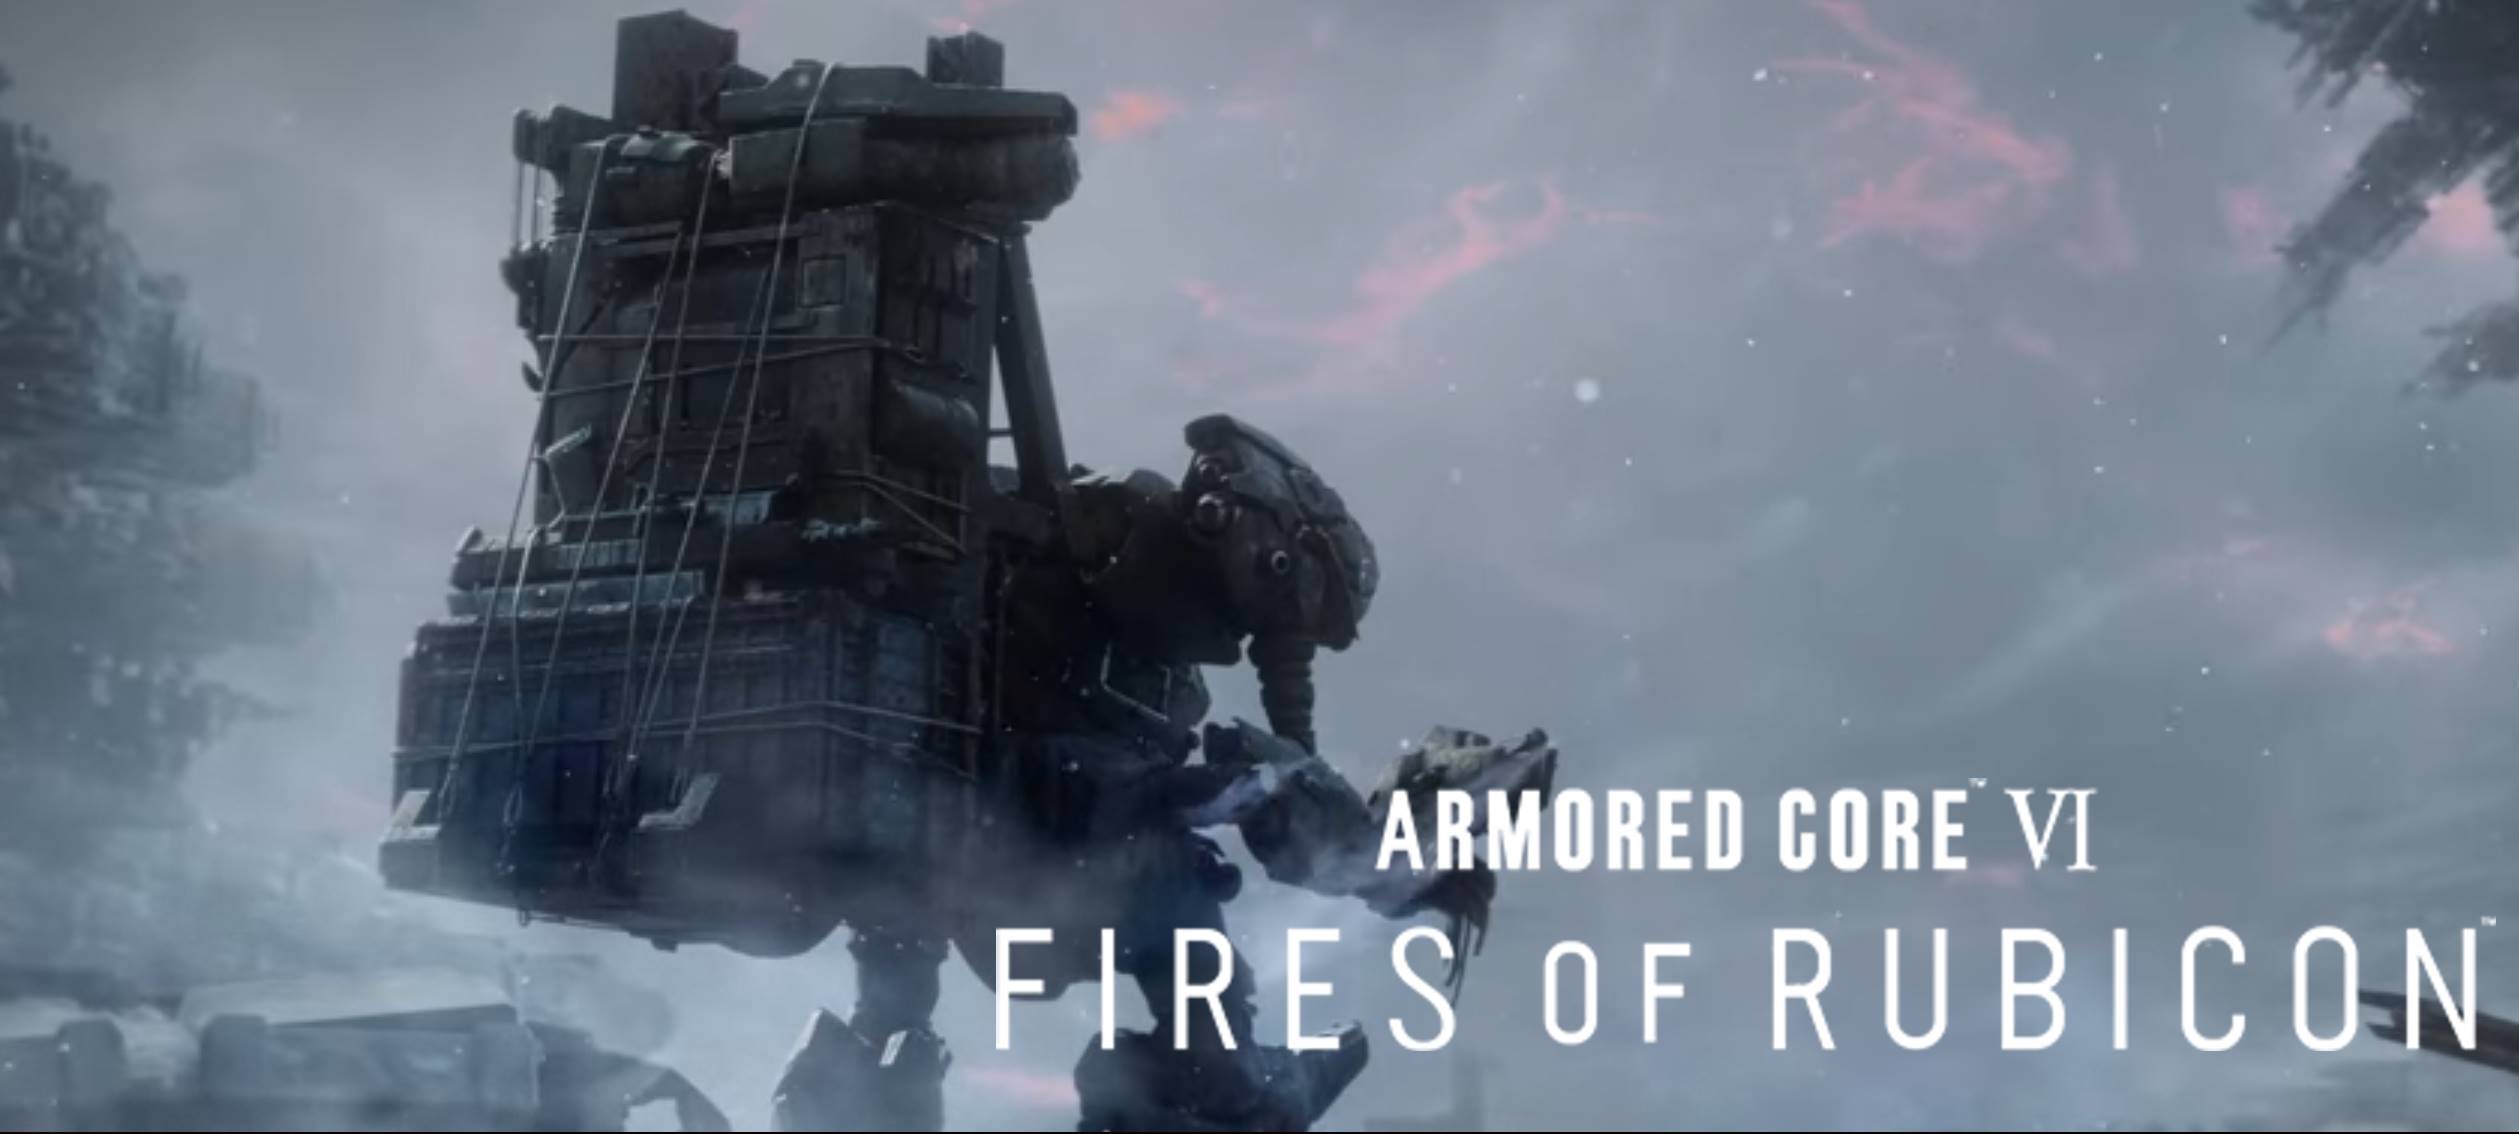 Armored Core VI Fires of Rubicon story trailer